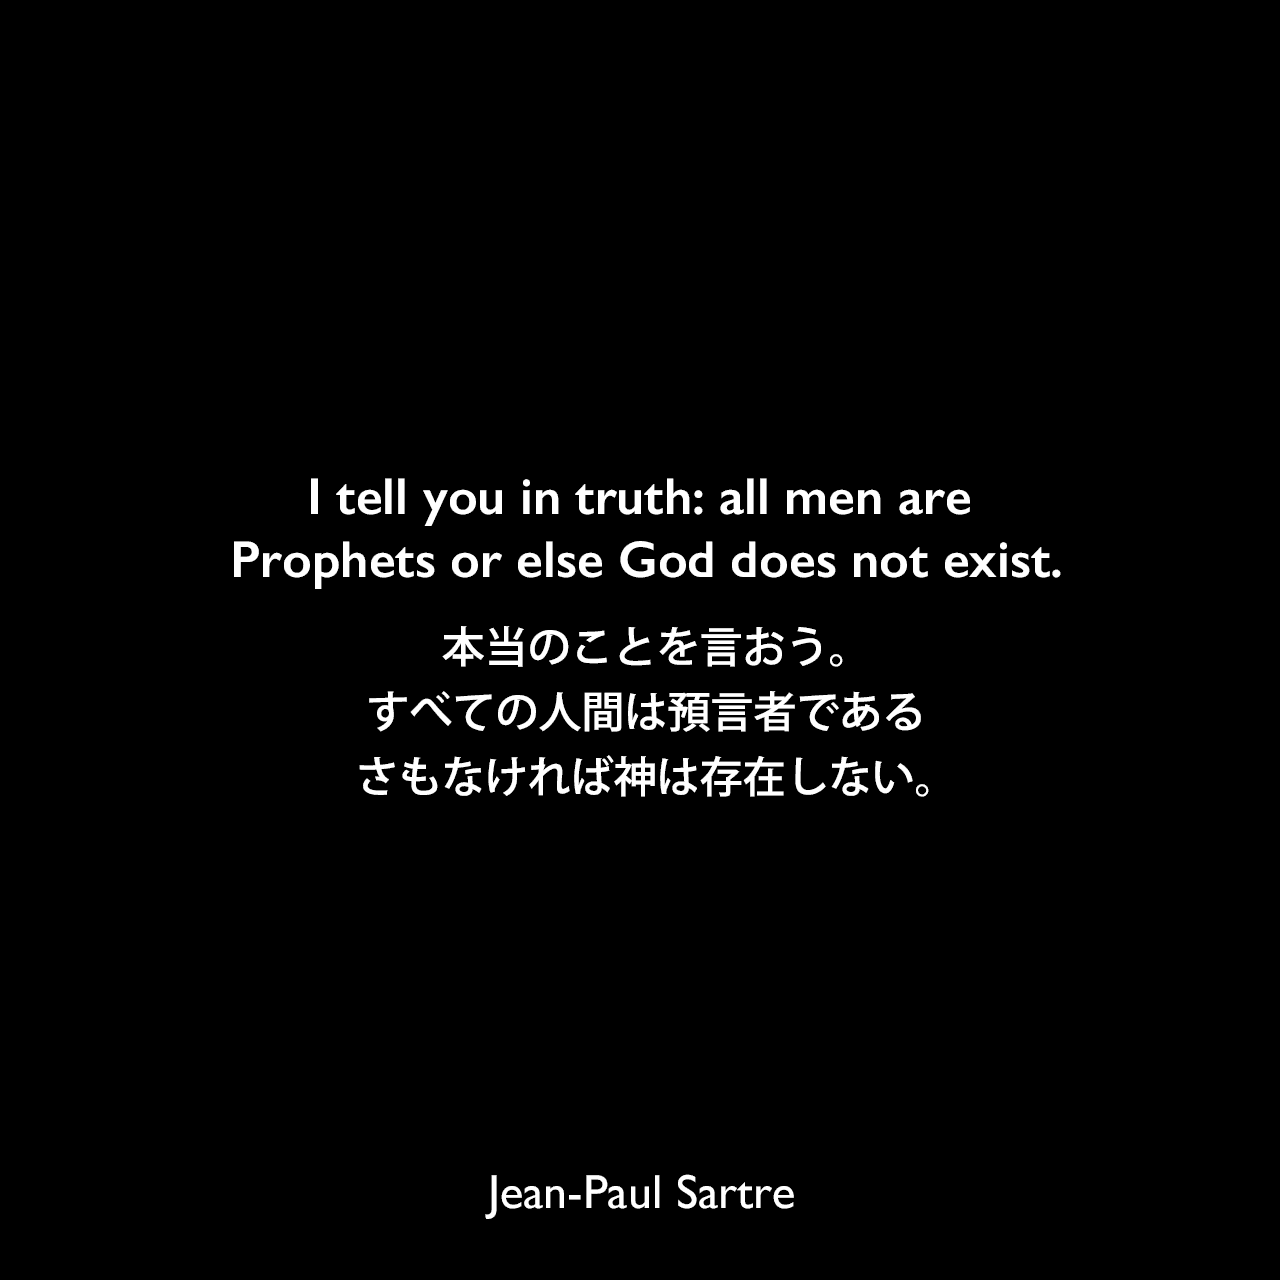 I tell you in truth: all men are Prophets or else God does not exist.本当のことを言おう。すべての人間は預言者である、さもなければ神は存在しない。- 1946年のサルトルのレクチャーでJean-Paul Sartre